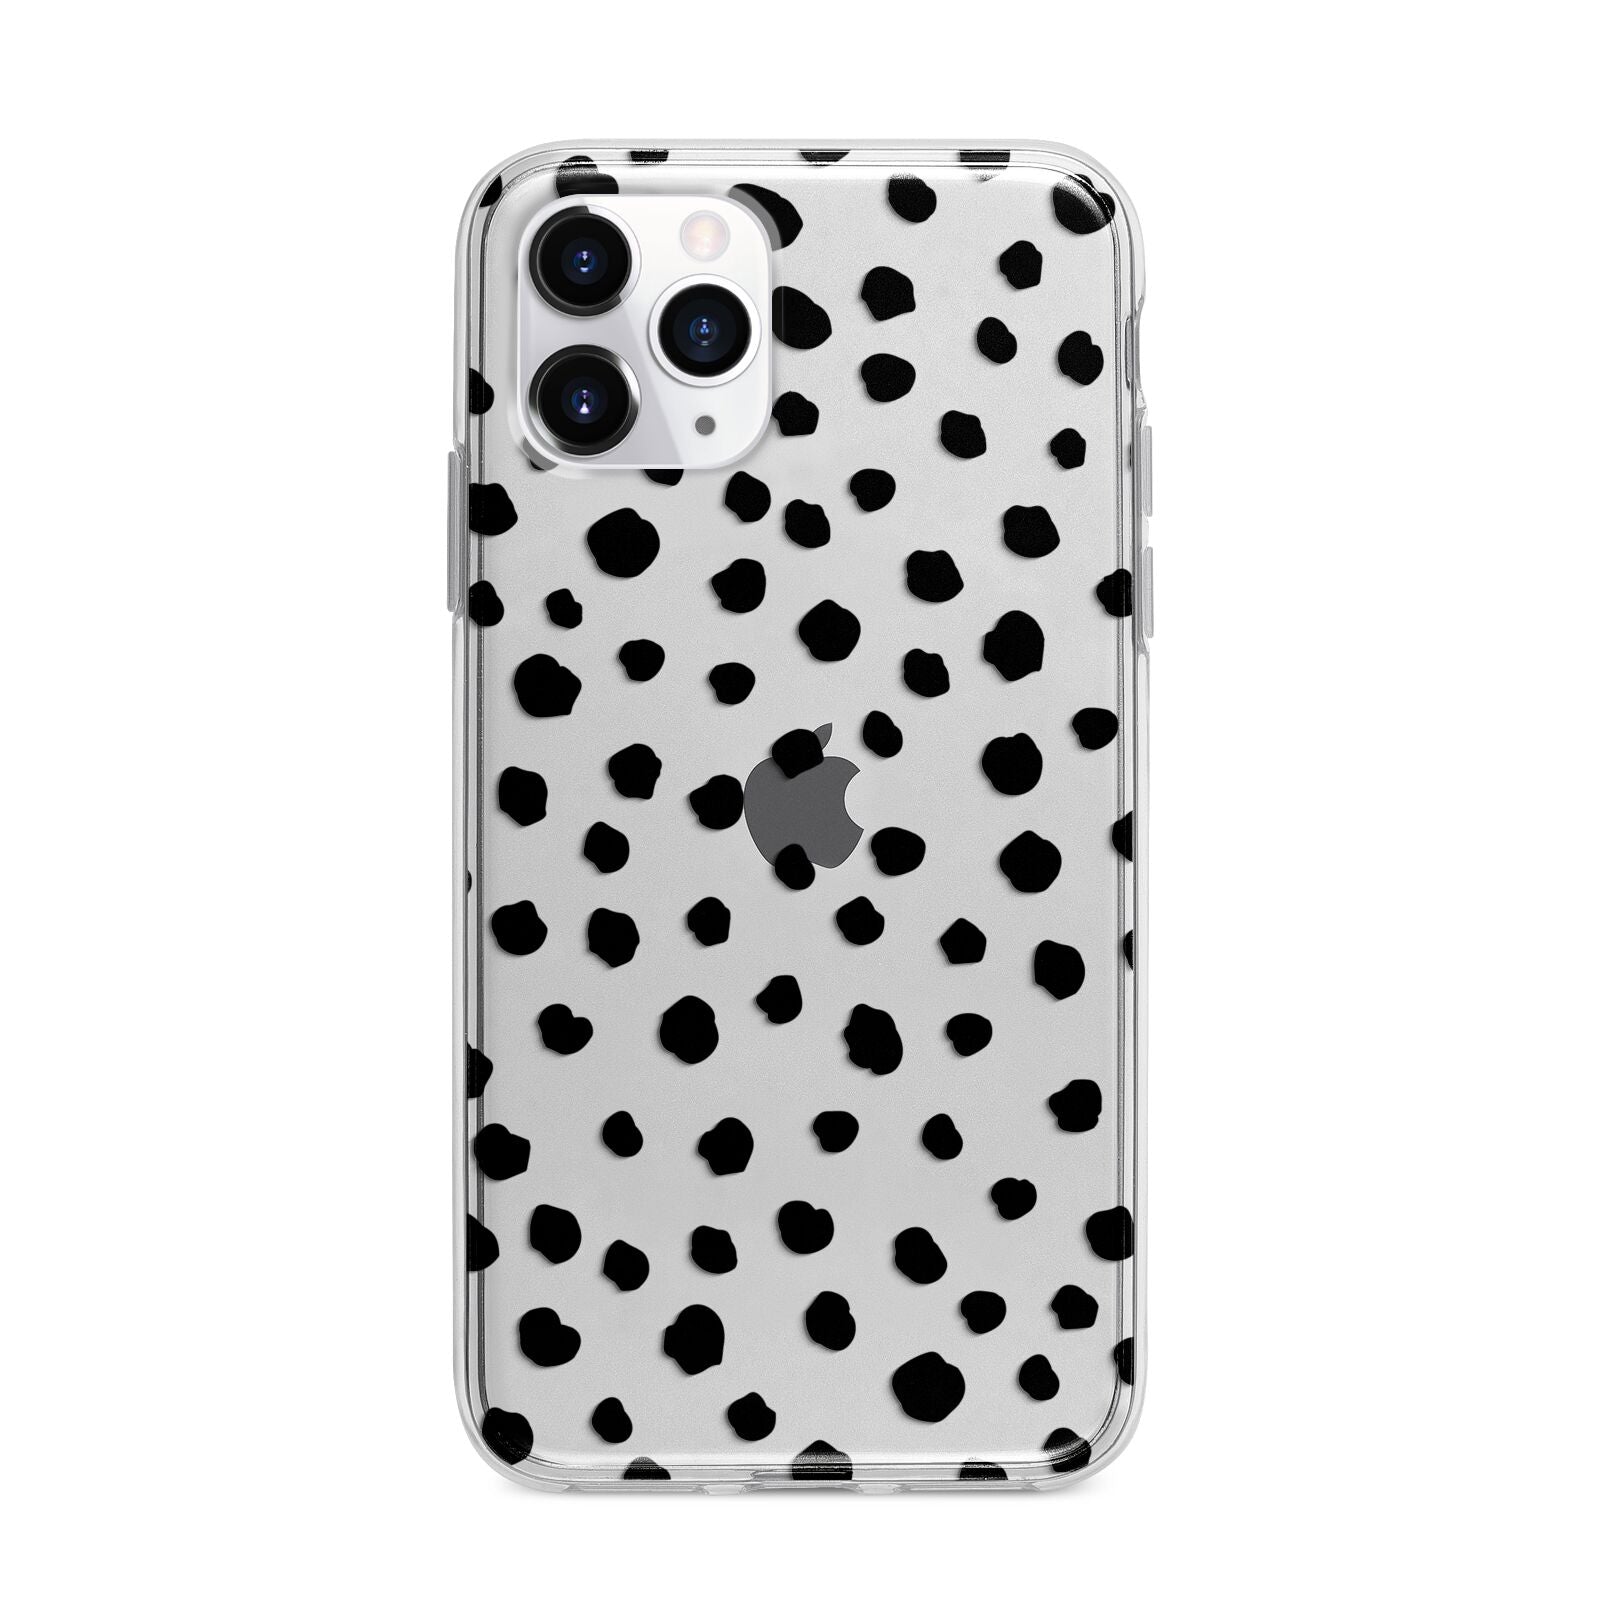 Polka Dot Apple iPhone 11 Pro in Silver with Bumper Case